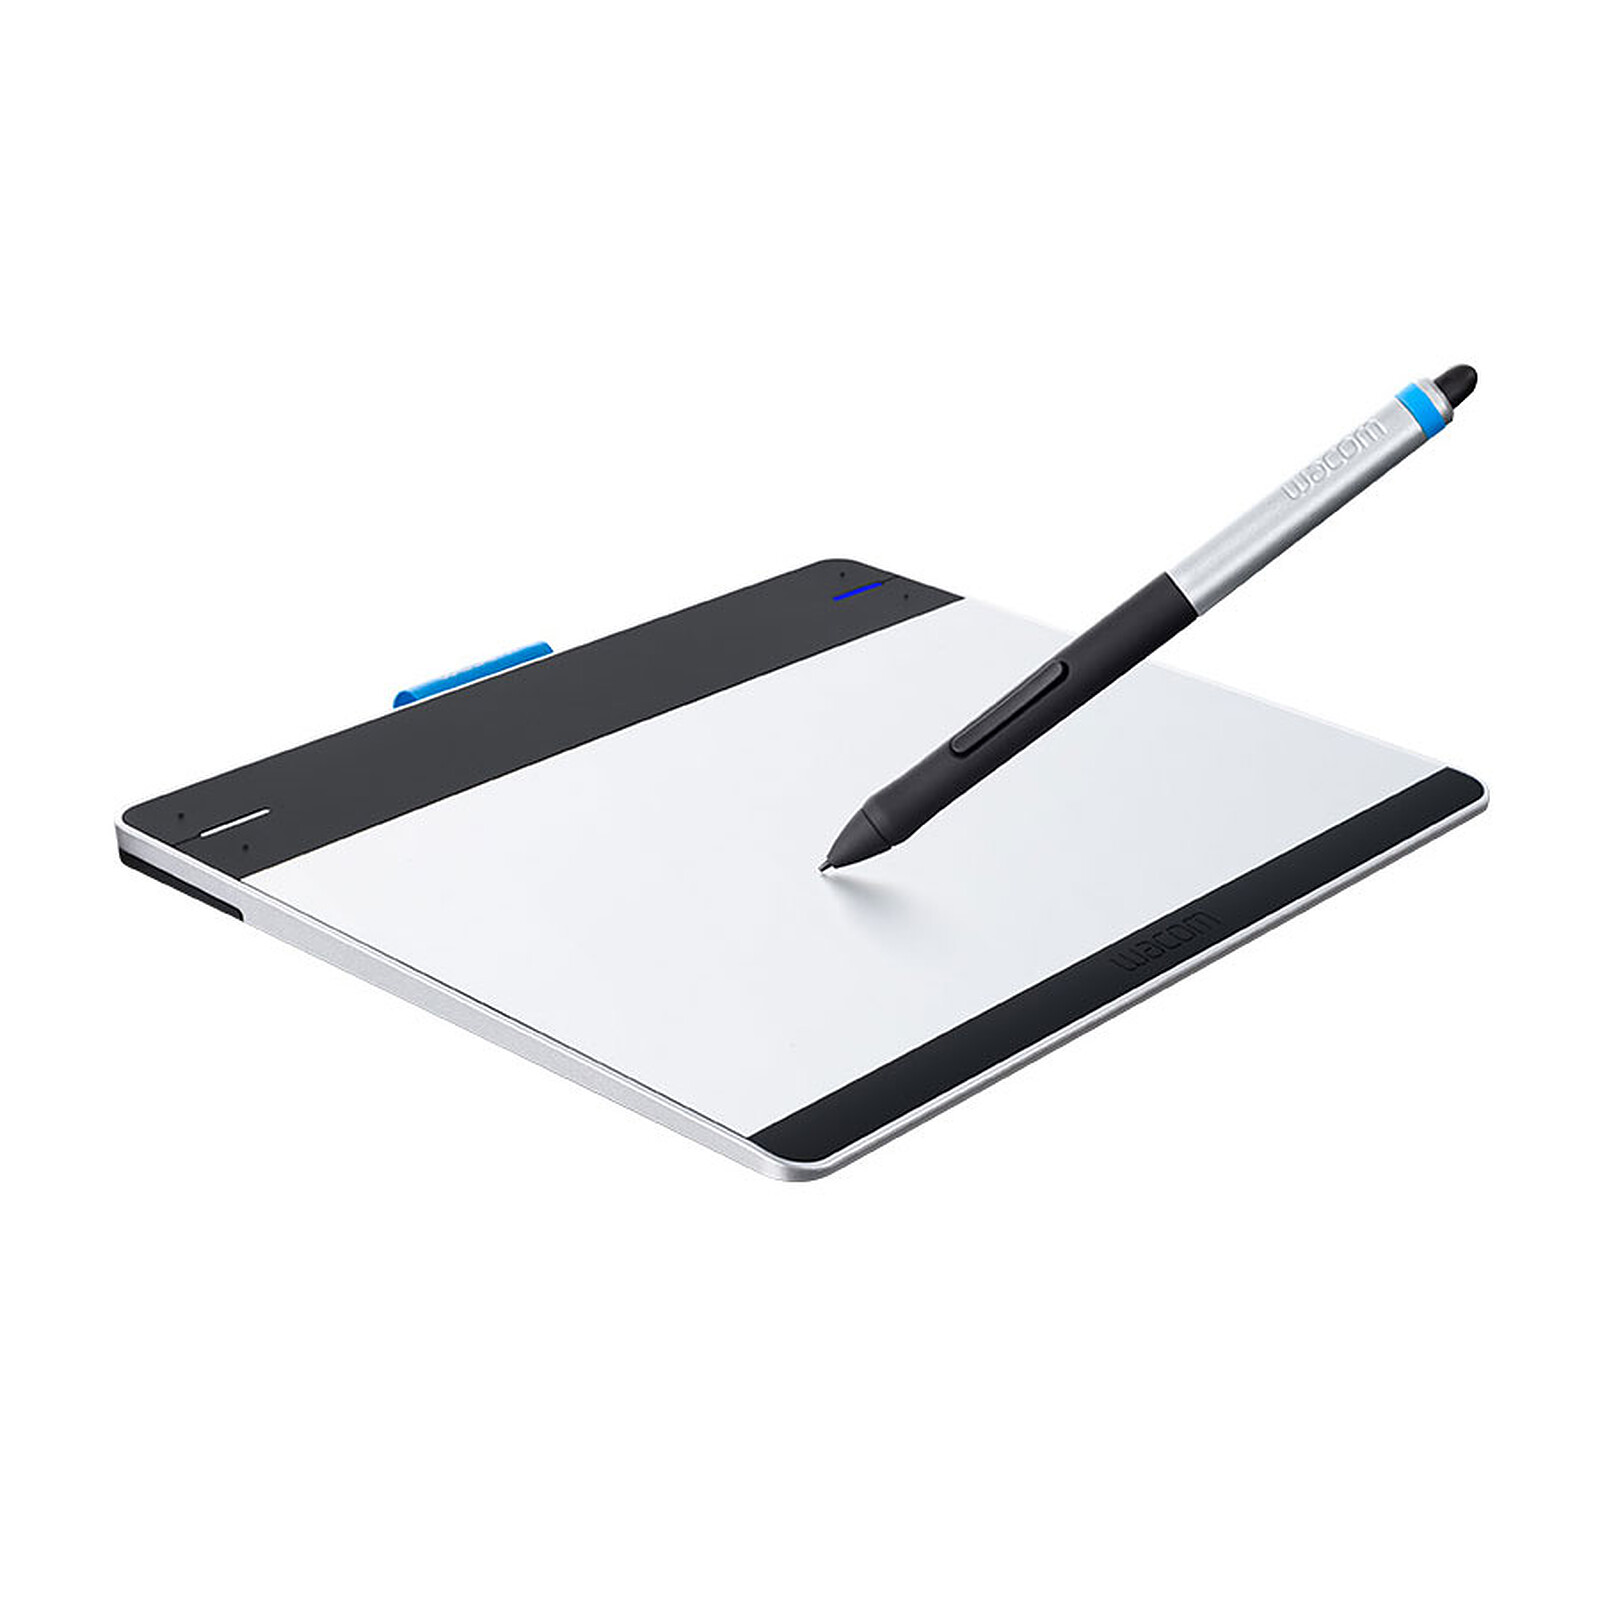 Wacom Intuos Pen Tablet Cth_480 Taille S 